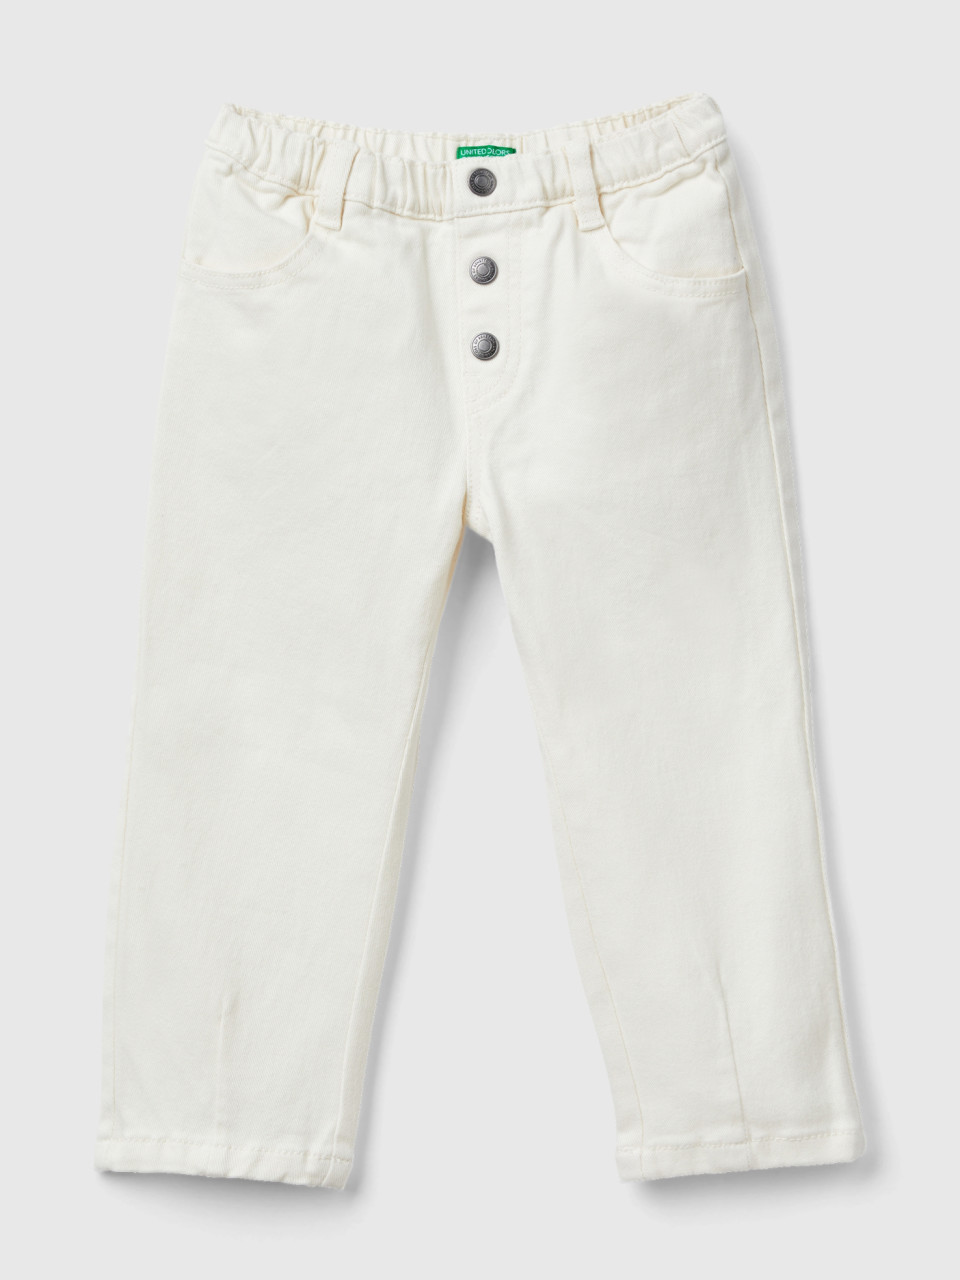 Benetton, Baggy Fit Trousers, Creamy White, Kids